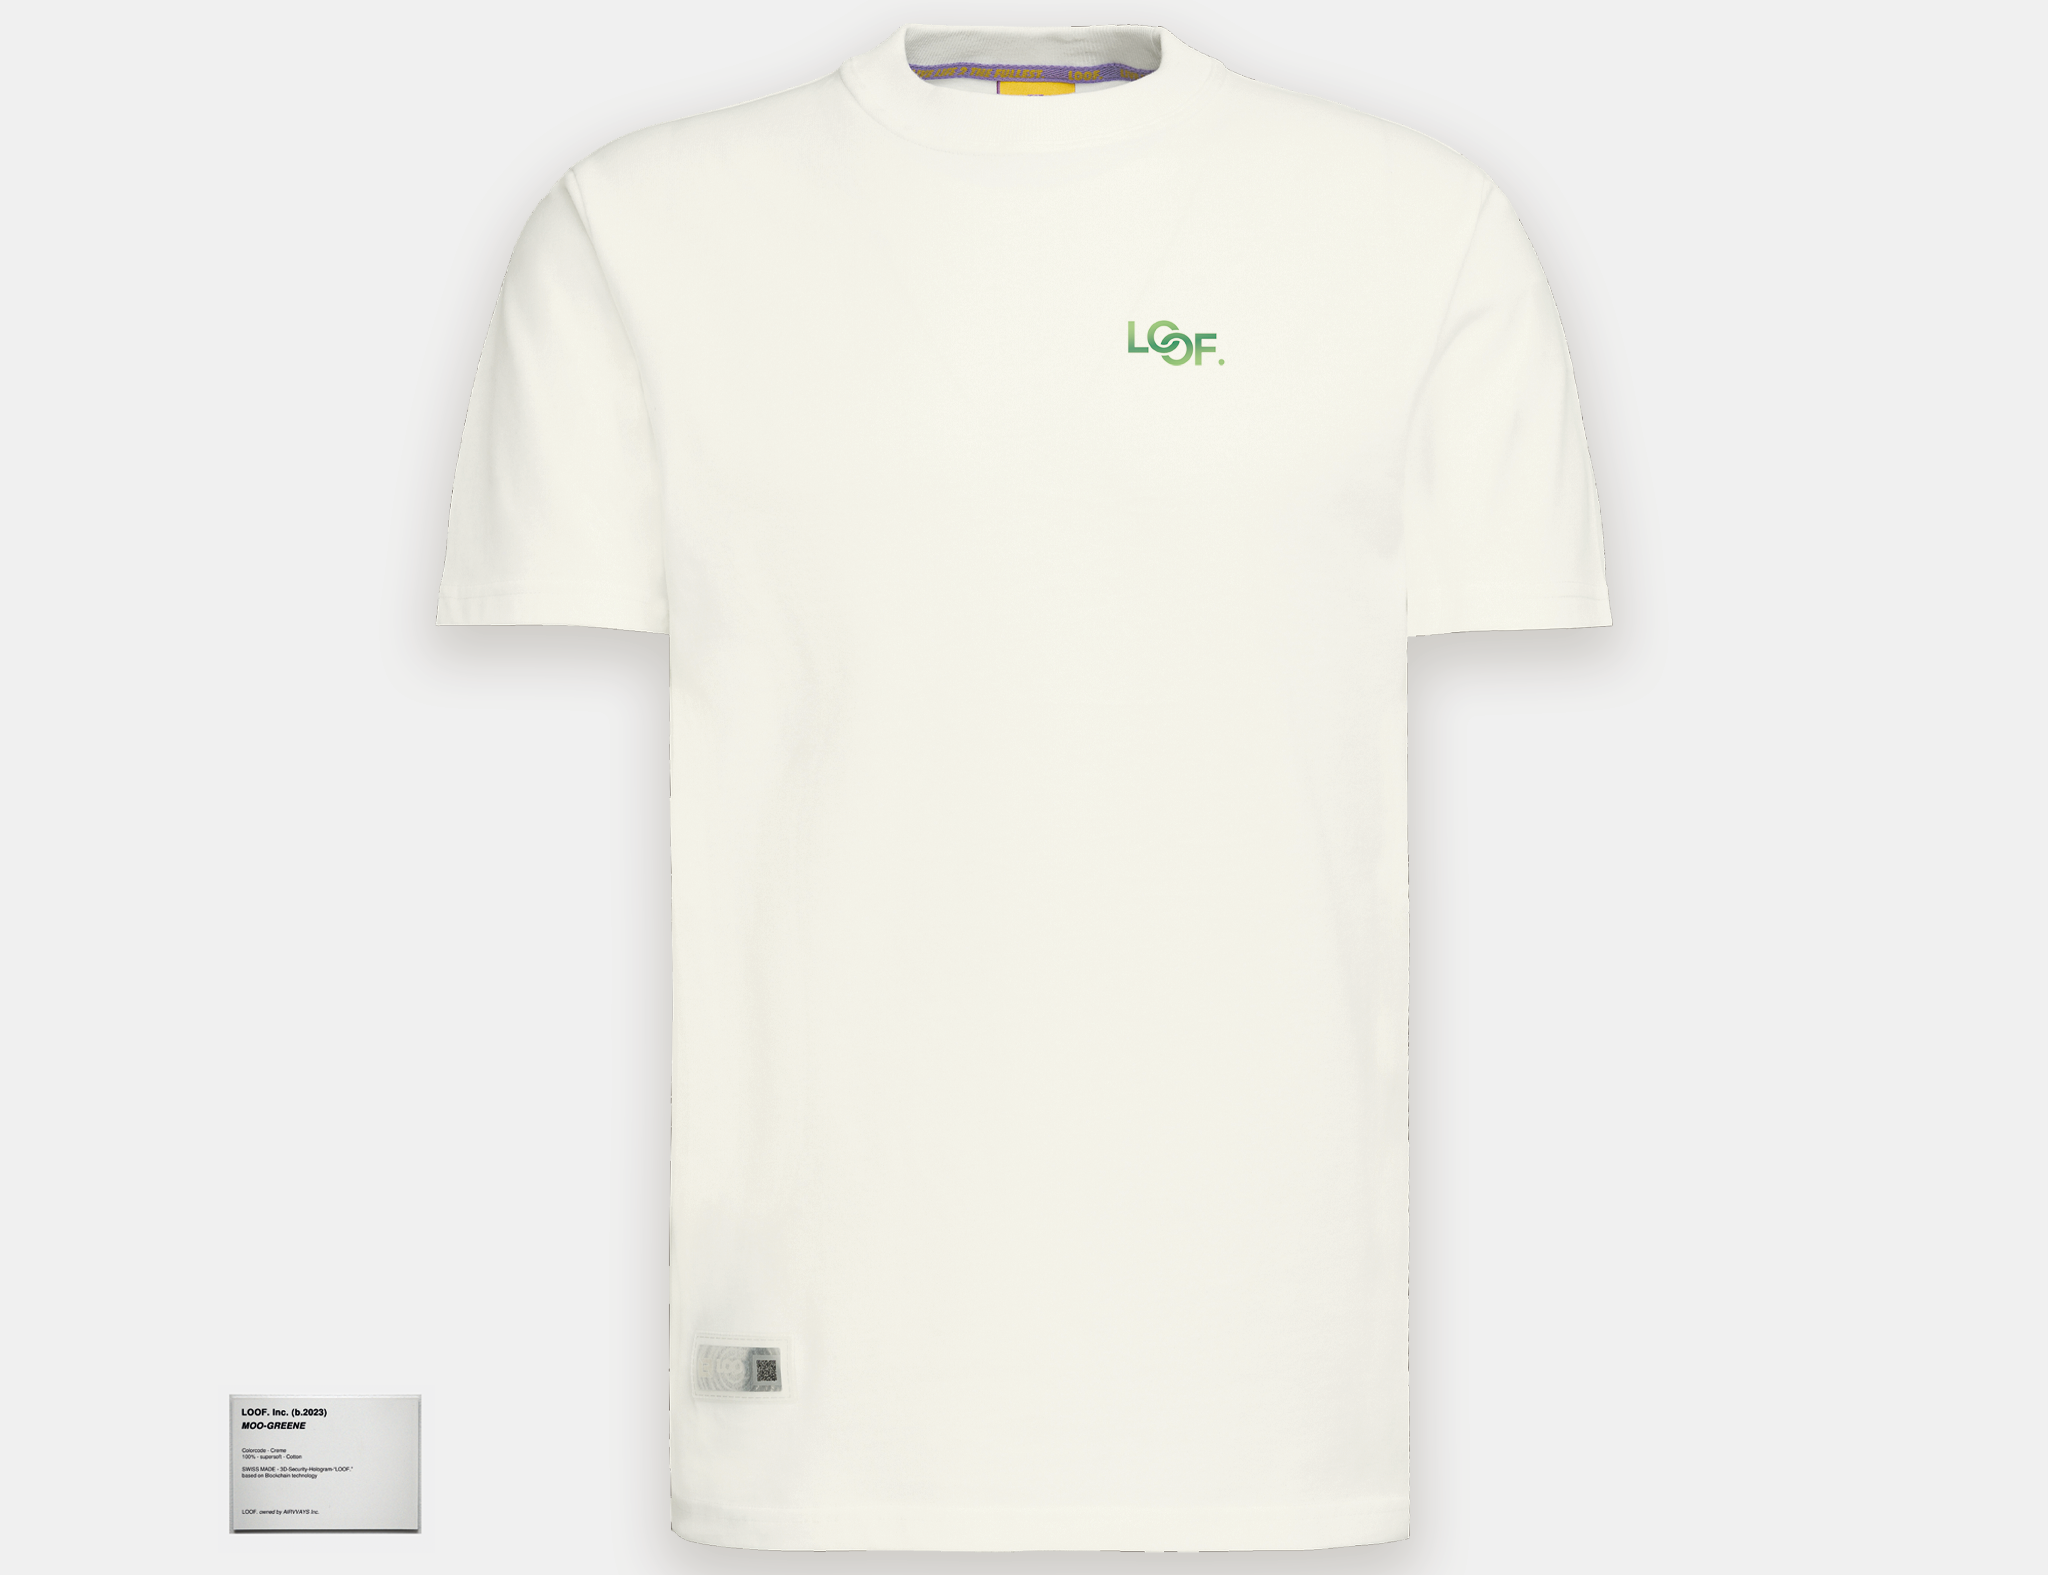 LOOF. Swiss streetwear longsize cut t-shirt in the color creme / off-white. The LOOF logo is in the iconic olympinikes design in the blending colors of greene